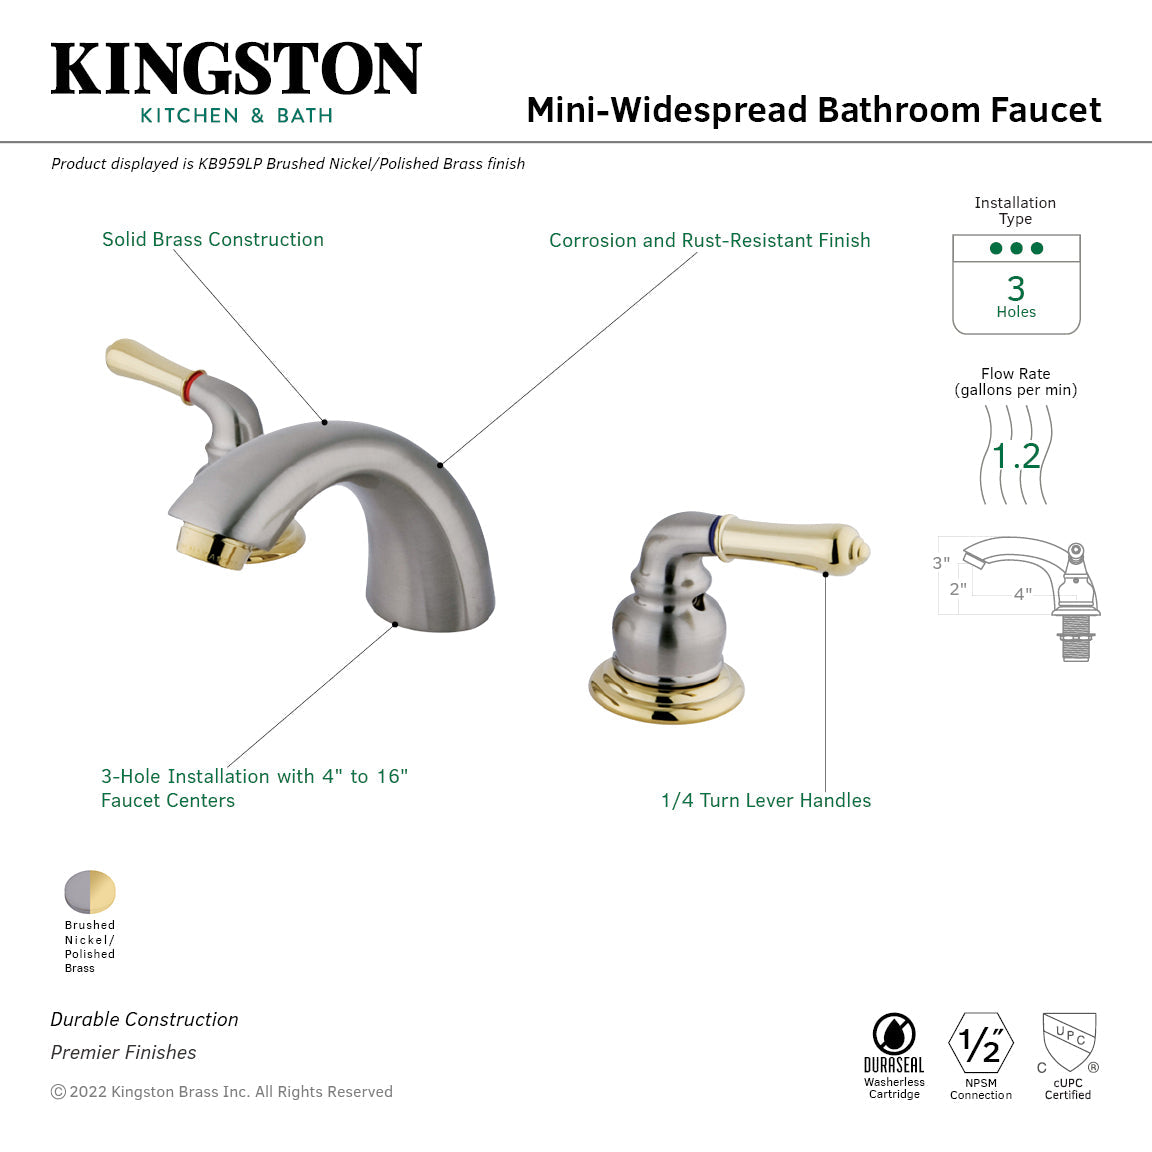 Magellan KB959LP Two-Handle 3-Hole Deck Mount Mini-Widespread Bathroom Faucet, Brushed Nickel/Polished Brass